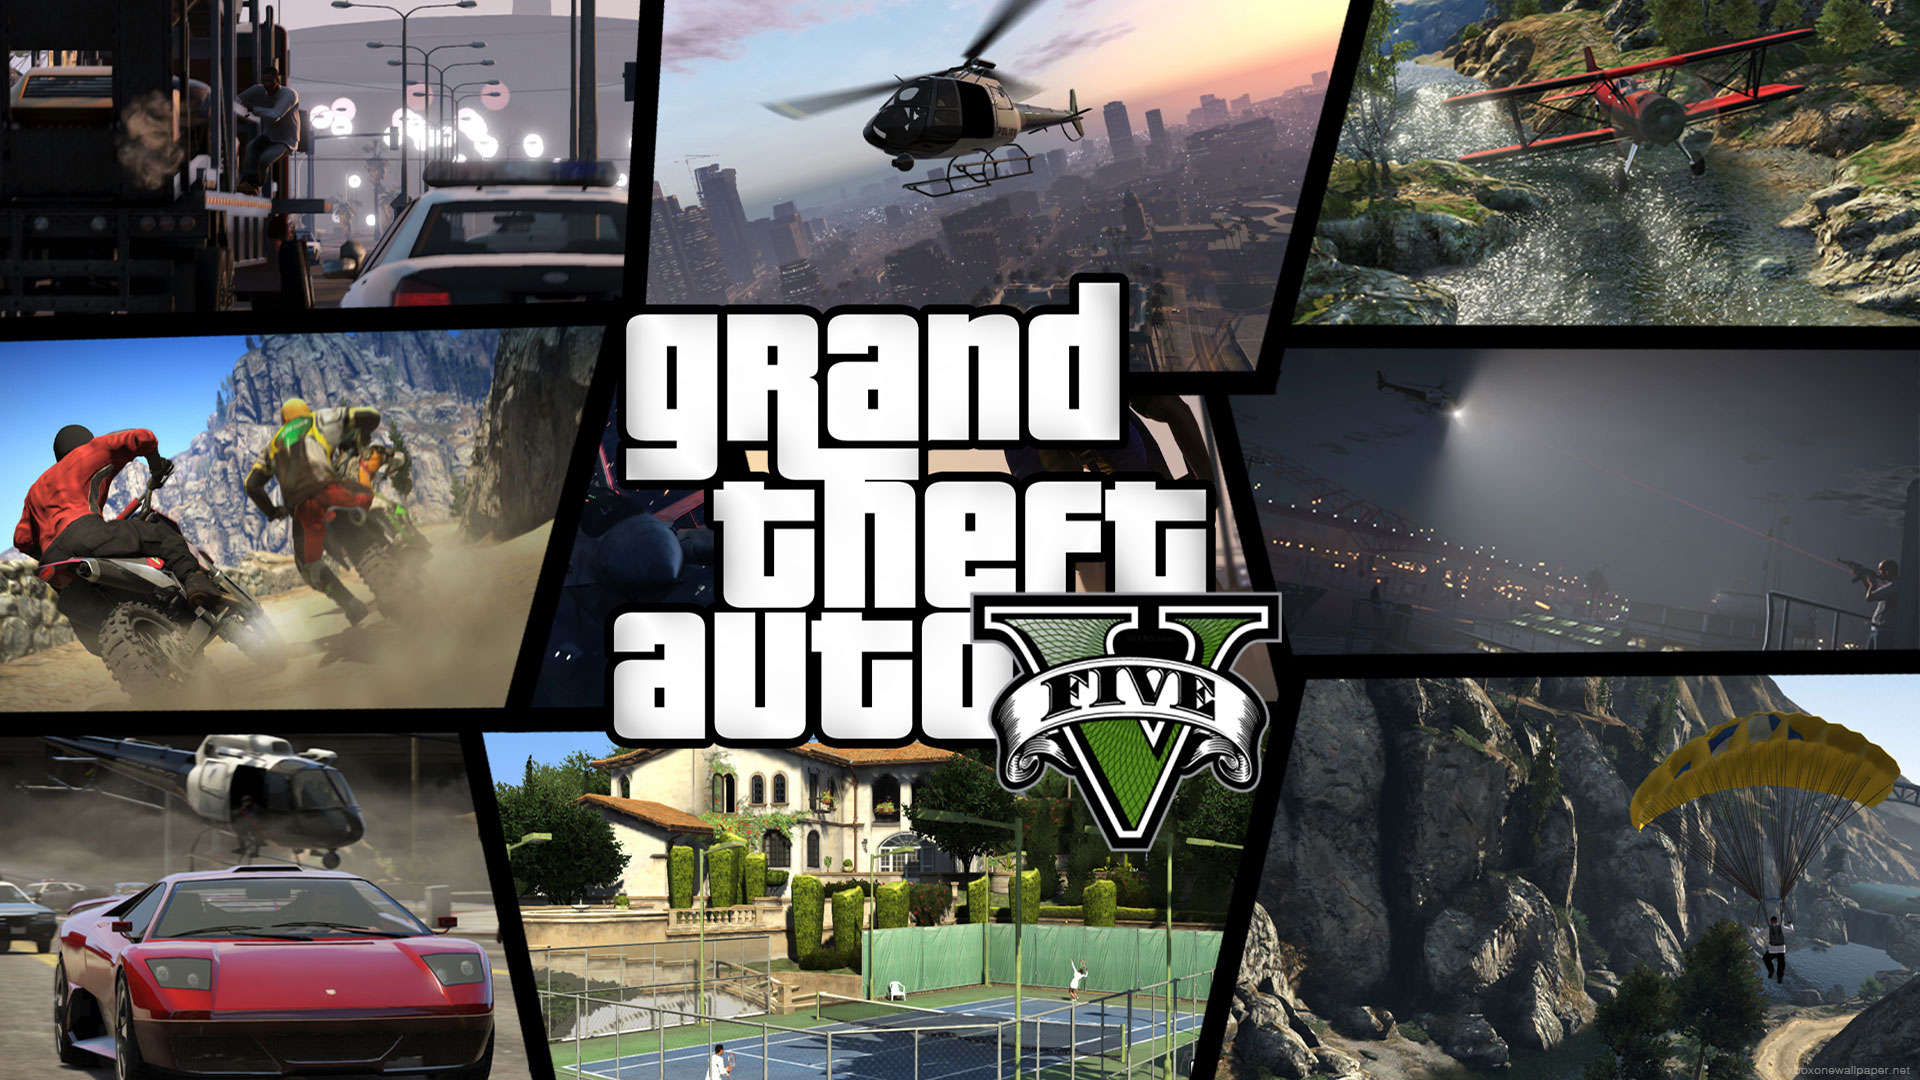 gta 5 wallpaper for pc,pc game,mode of transport,vehicle,car,games